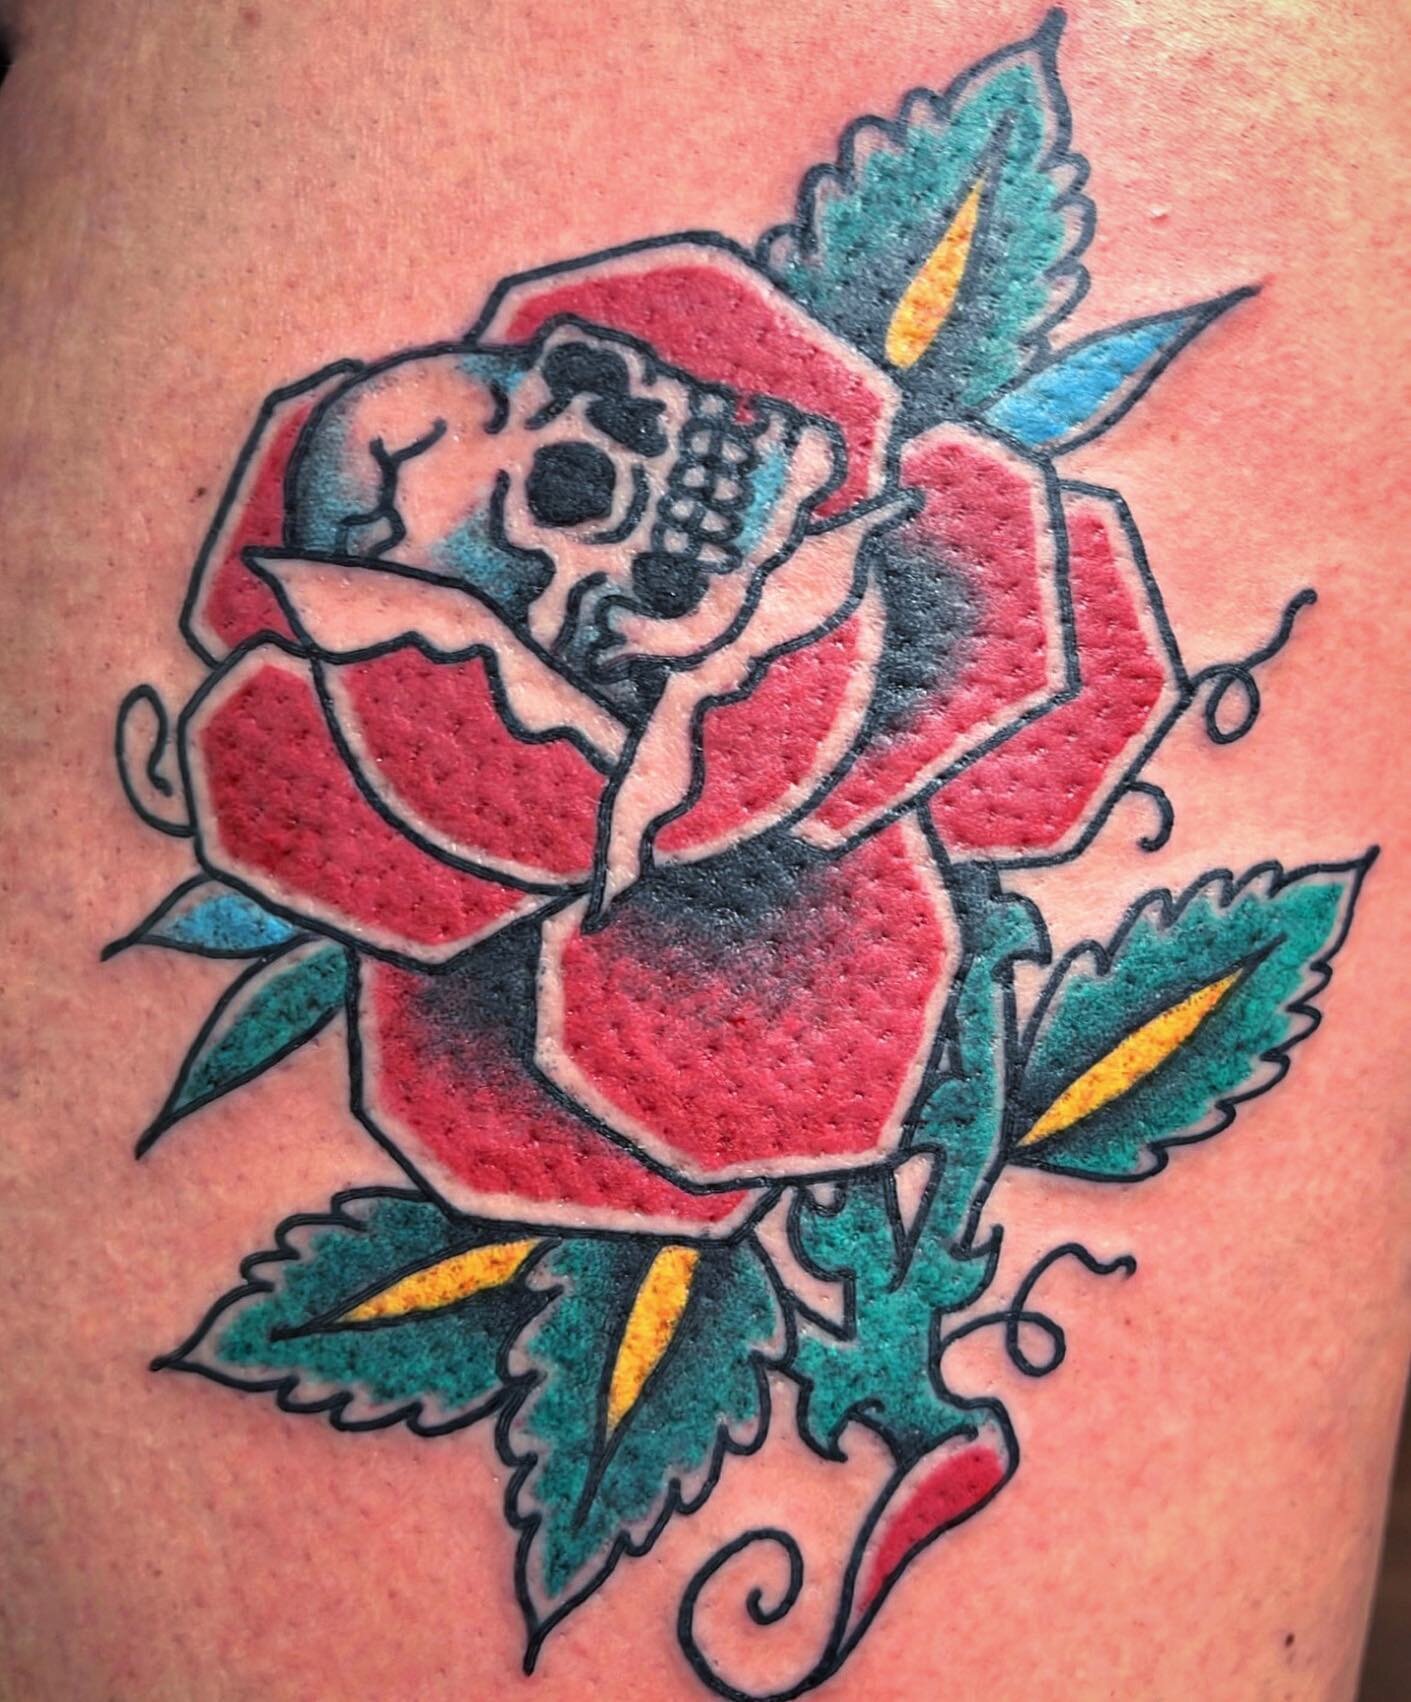 Here&rsquo;s a rose of death tattoo @kd1904 made this weekend off one of his hand painted flash sheets.  Hope you guys and girls like it!! More American Traditional please!  Clementinetattoo.com #clementinetattoo #clementine #sandiegotattooartist #sa